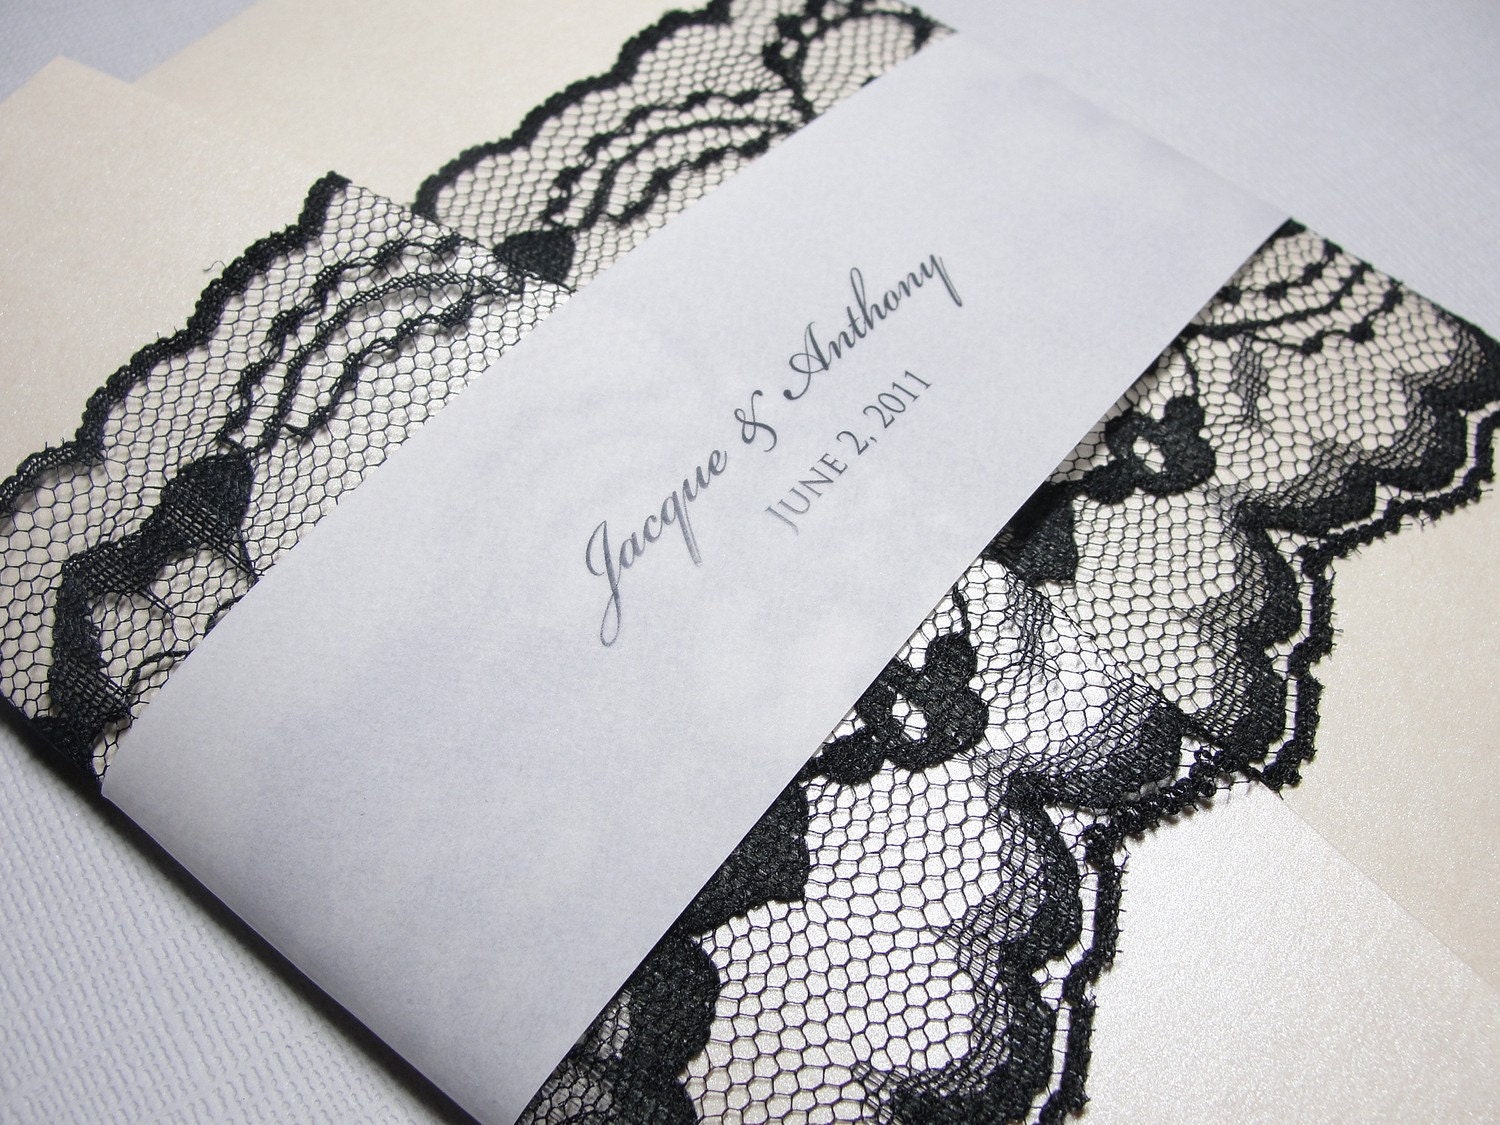 wedding invitations with lace